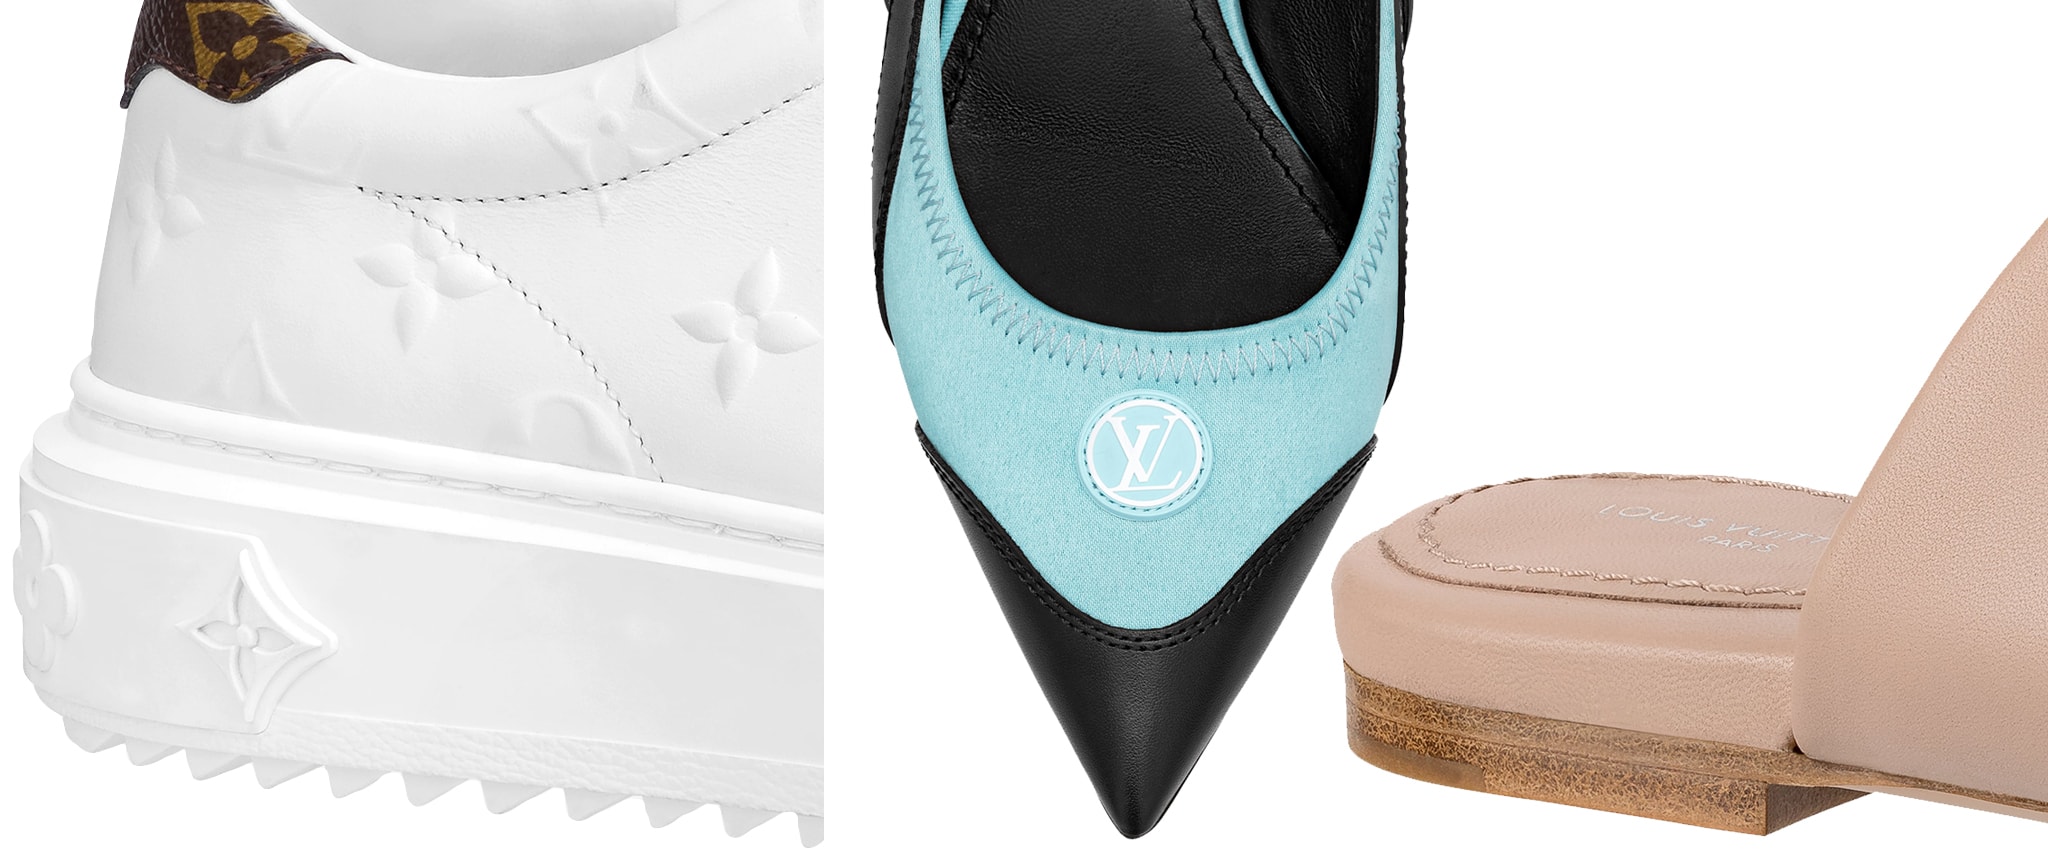 8 Most Popular Louis Vuitton Shoes: How to Spot Fakes